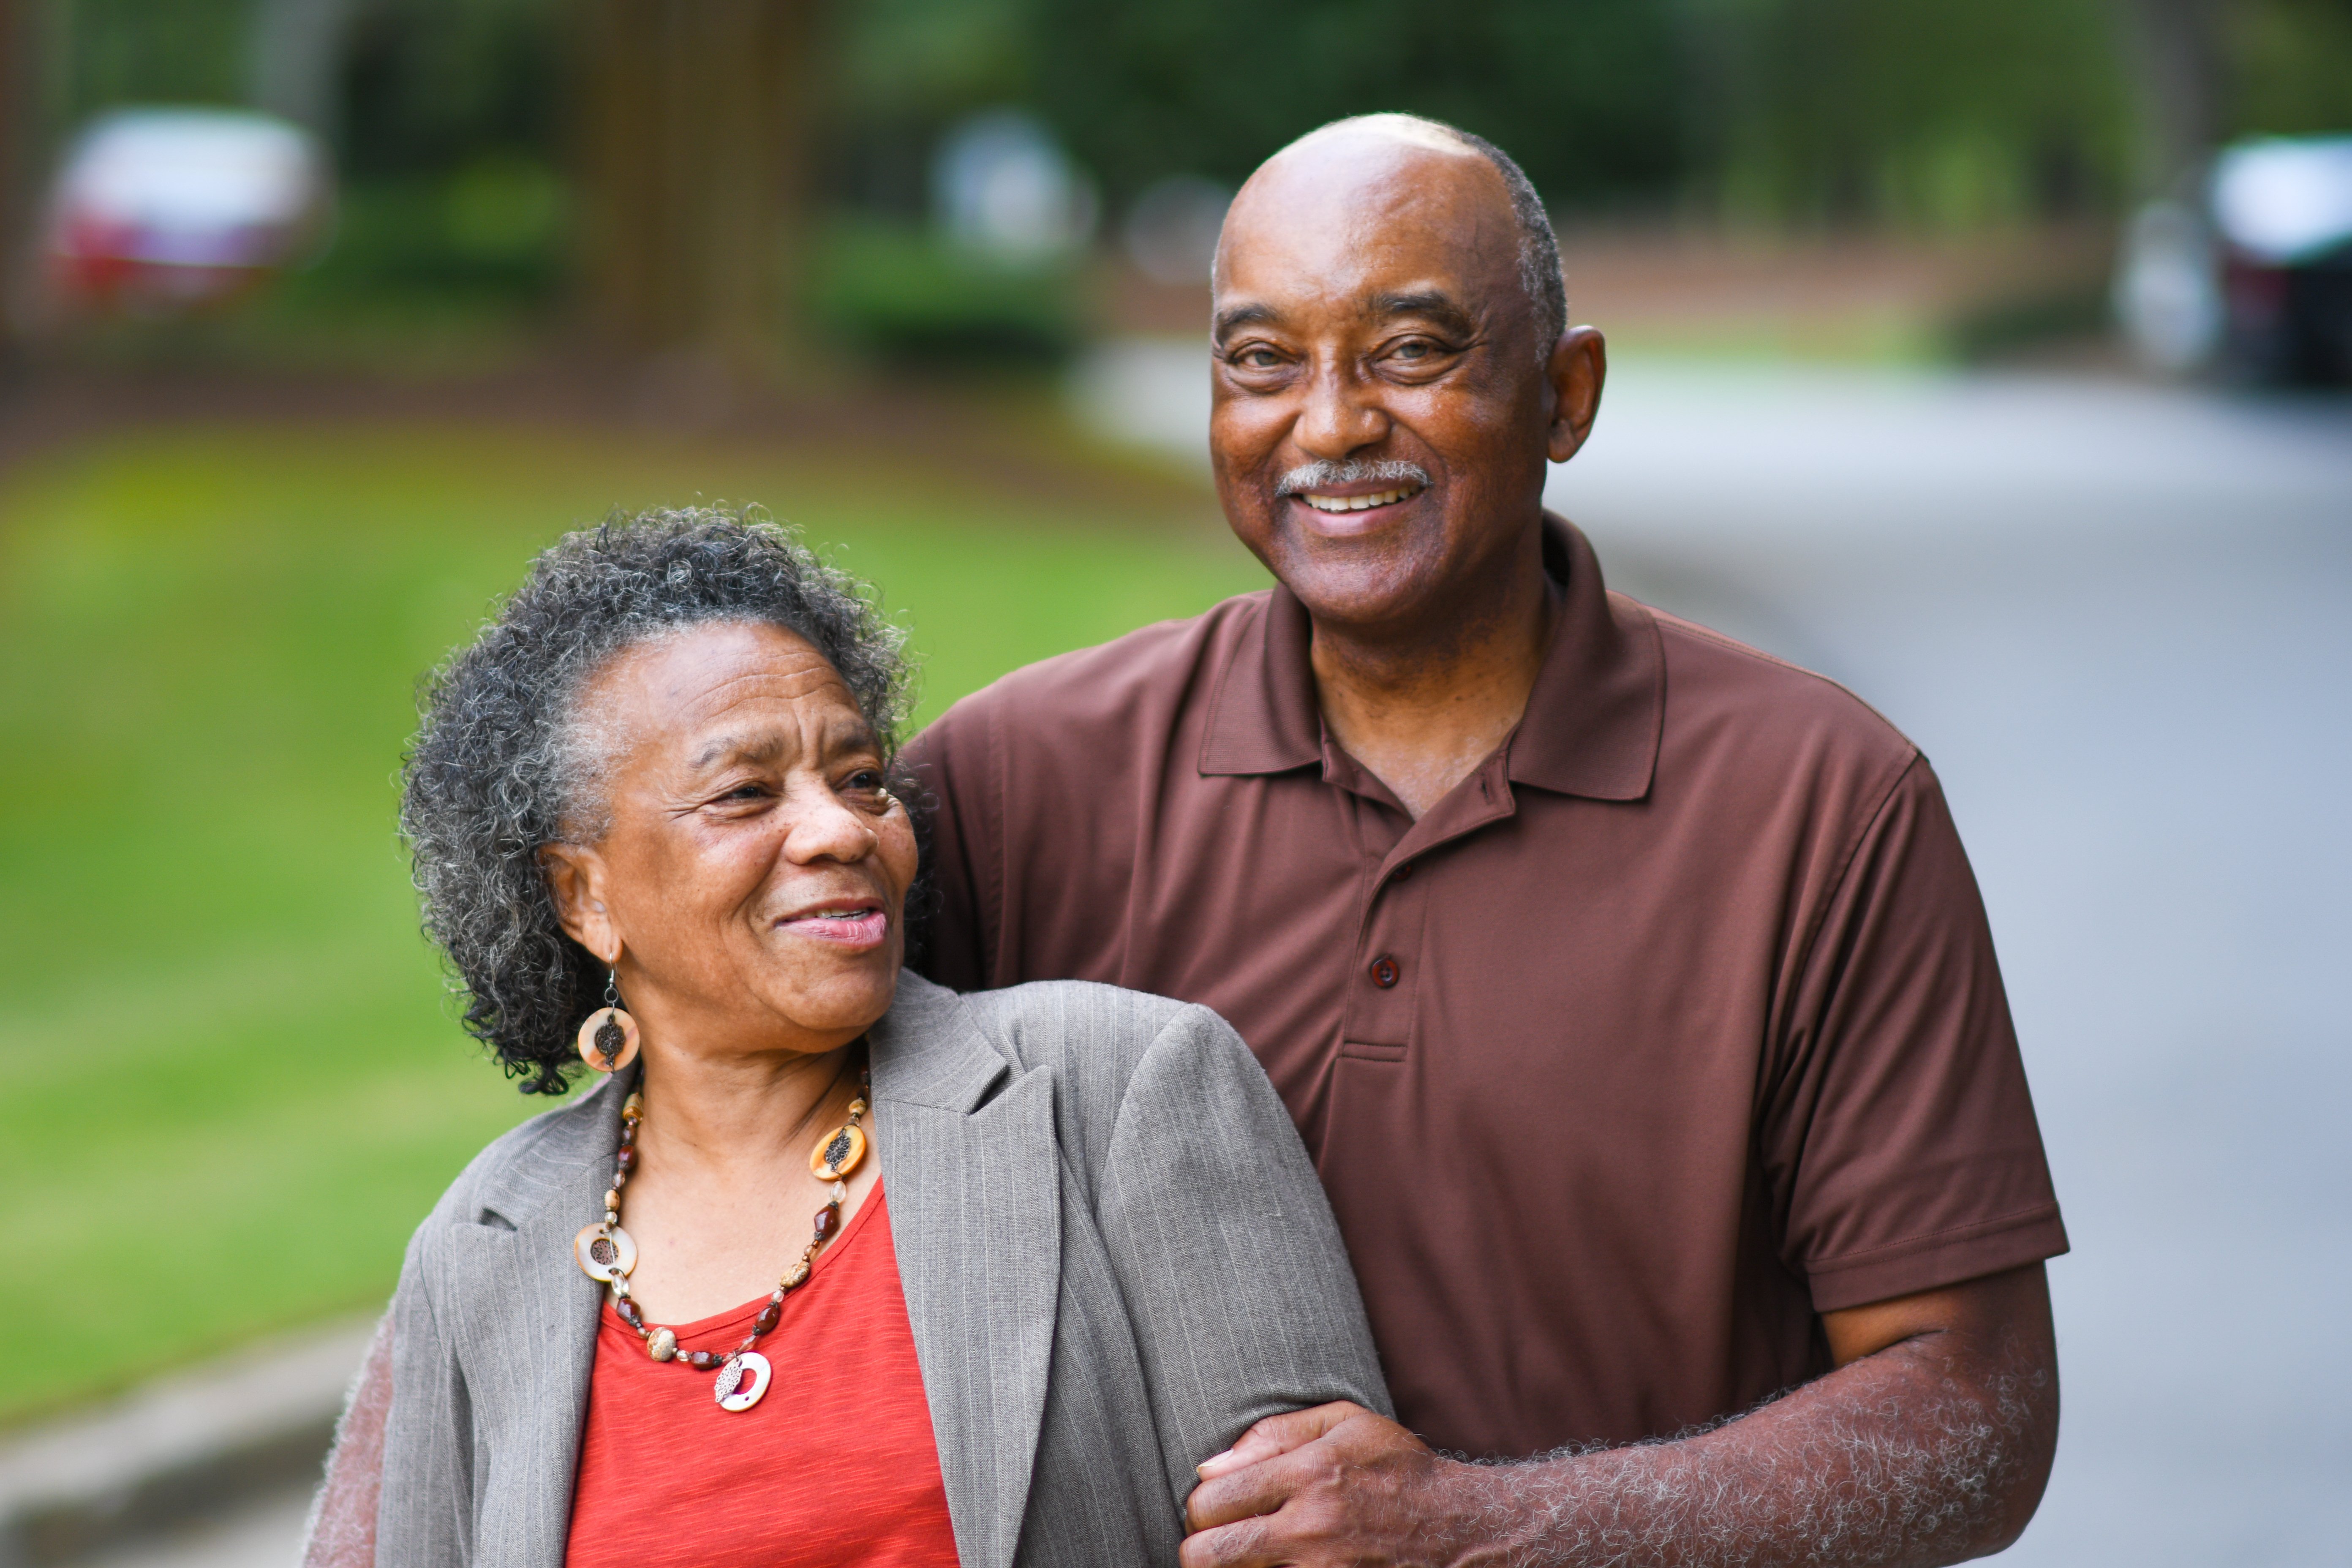 An elderly couple laughing | Photo: Shutterstock